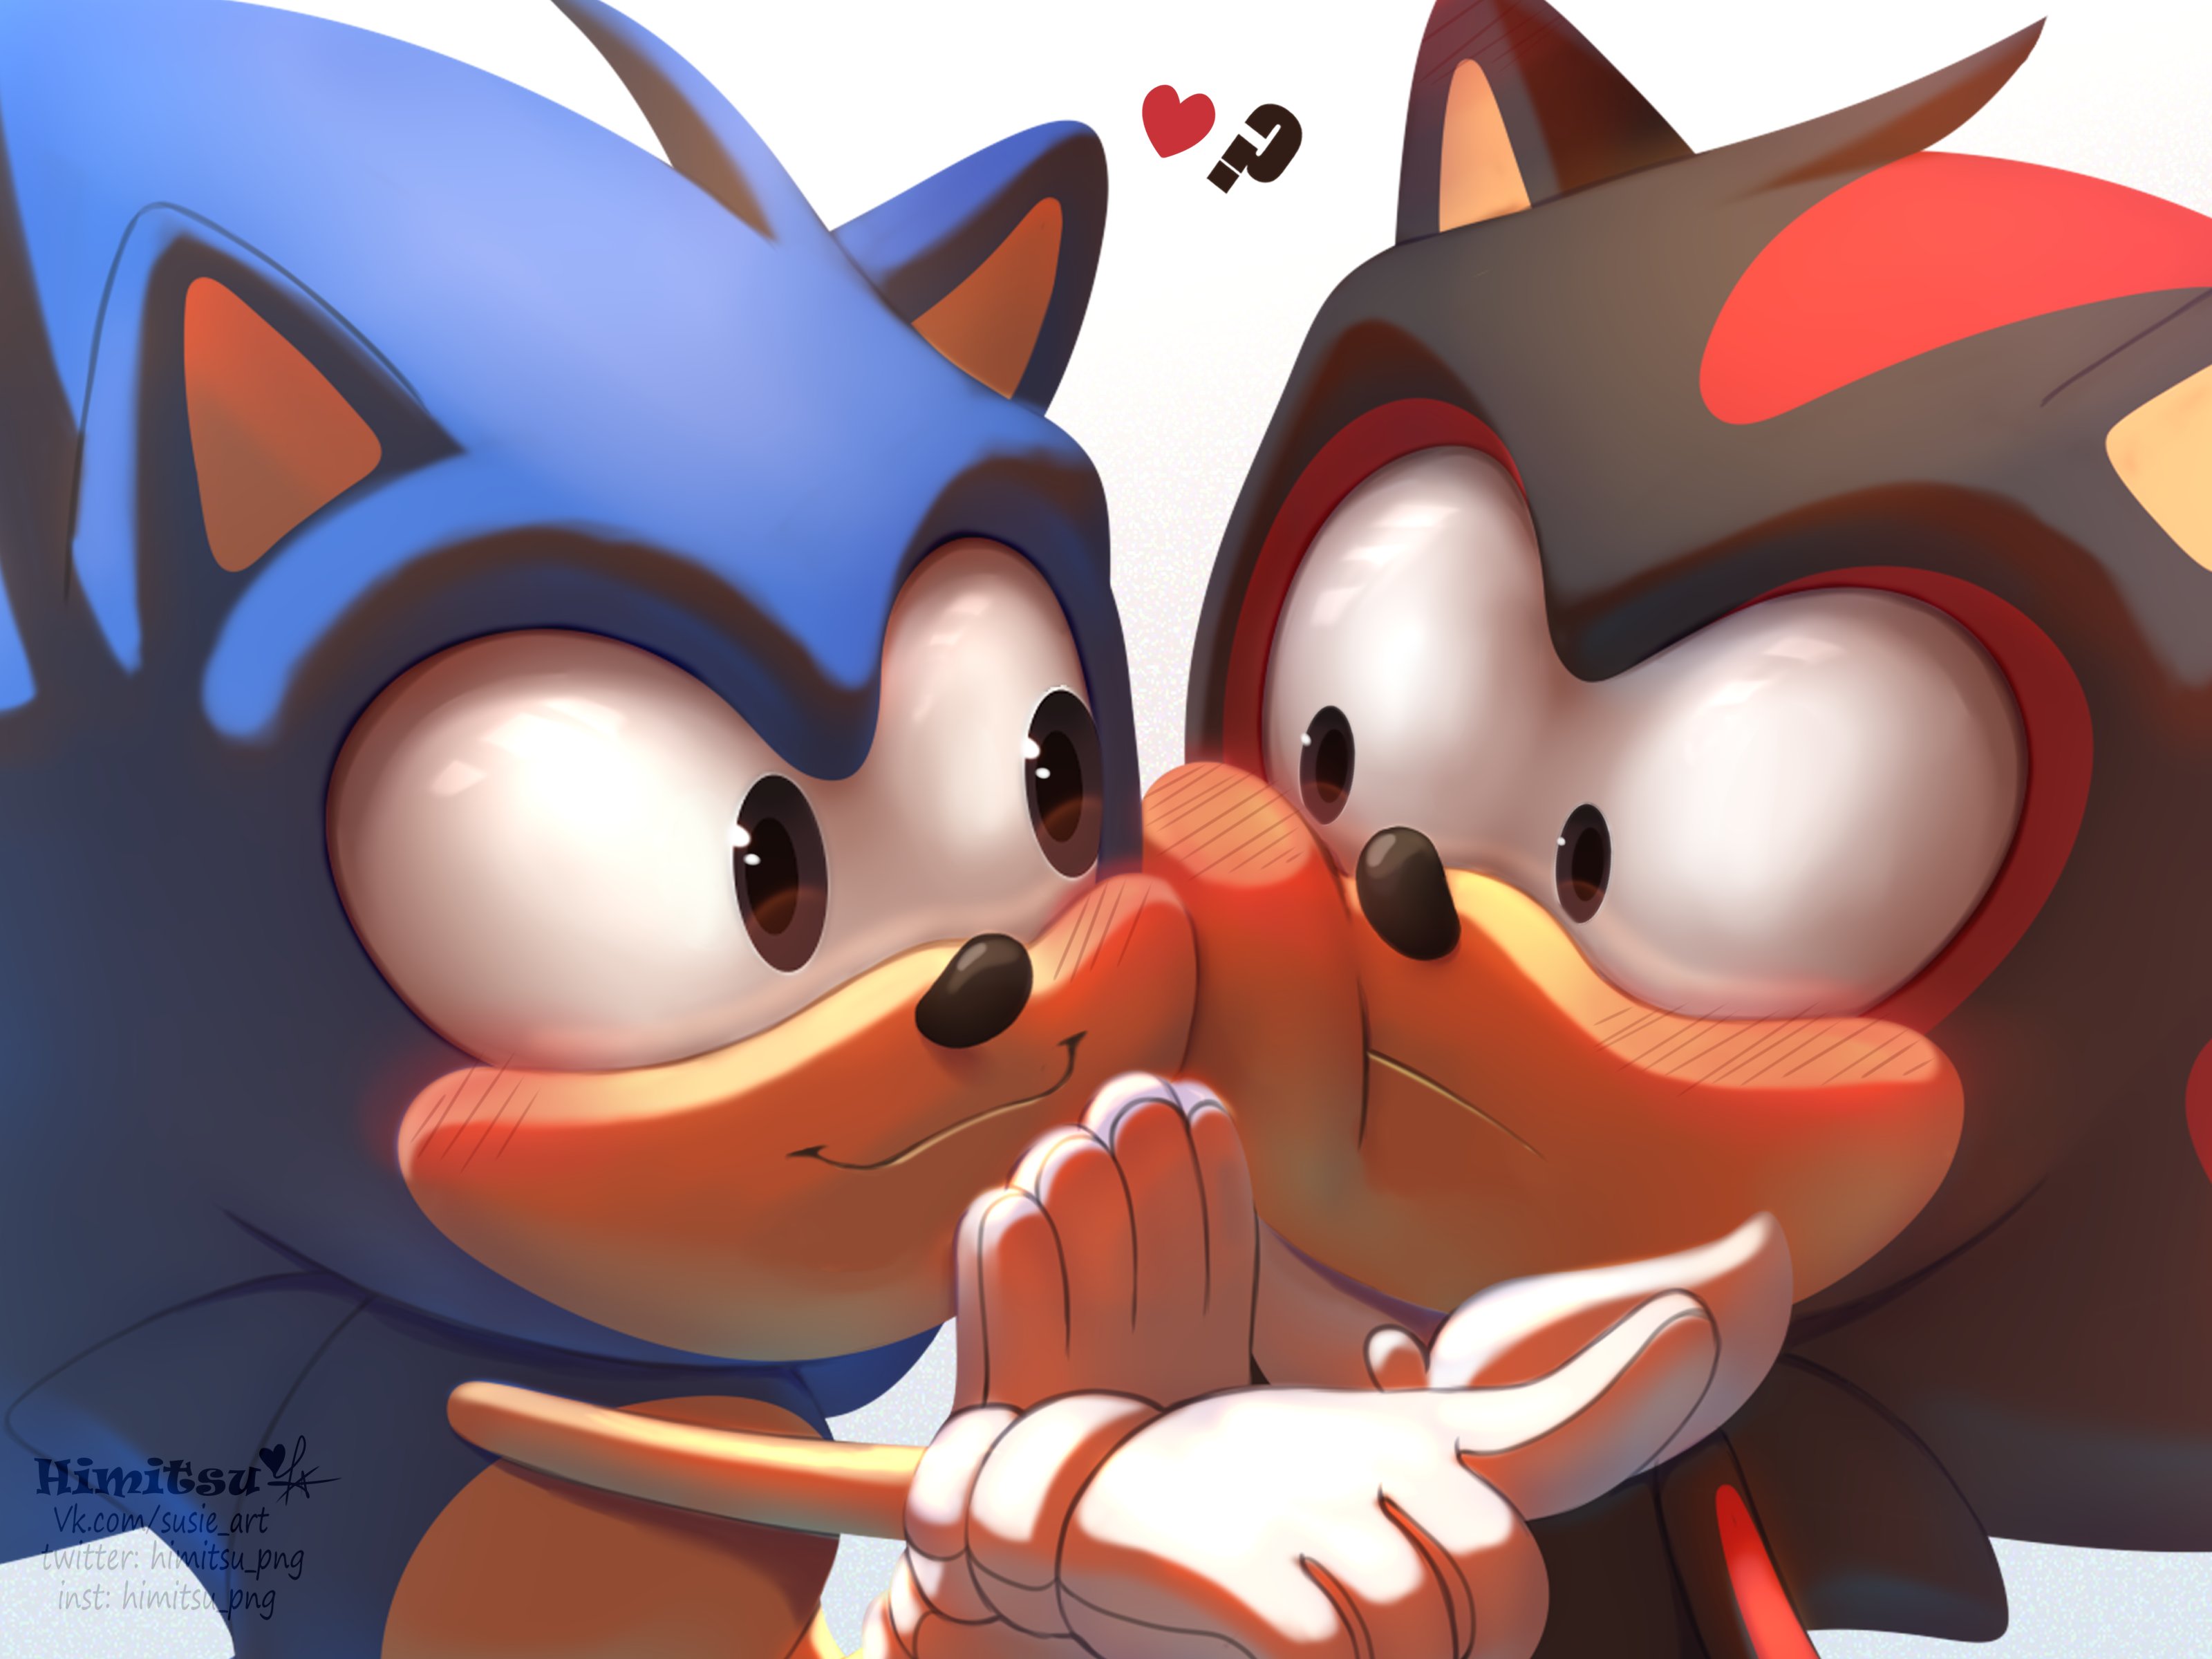 ℌ𝔦𝔪𝔦𝔱𝔰𝔲 (COMMS OPEN) on X: This is the first time they've seen a kiss  on the cheek, and Sonic now wants to give it a try #sonadow #shadonic  #SonicTheHedgehog #ShadowTheHedgehog #sonic #shadow #